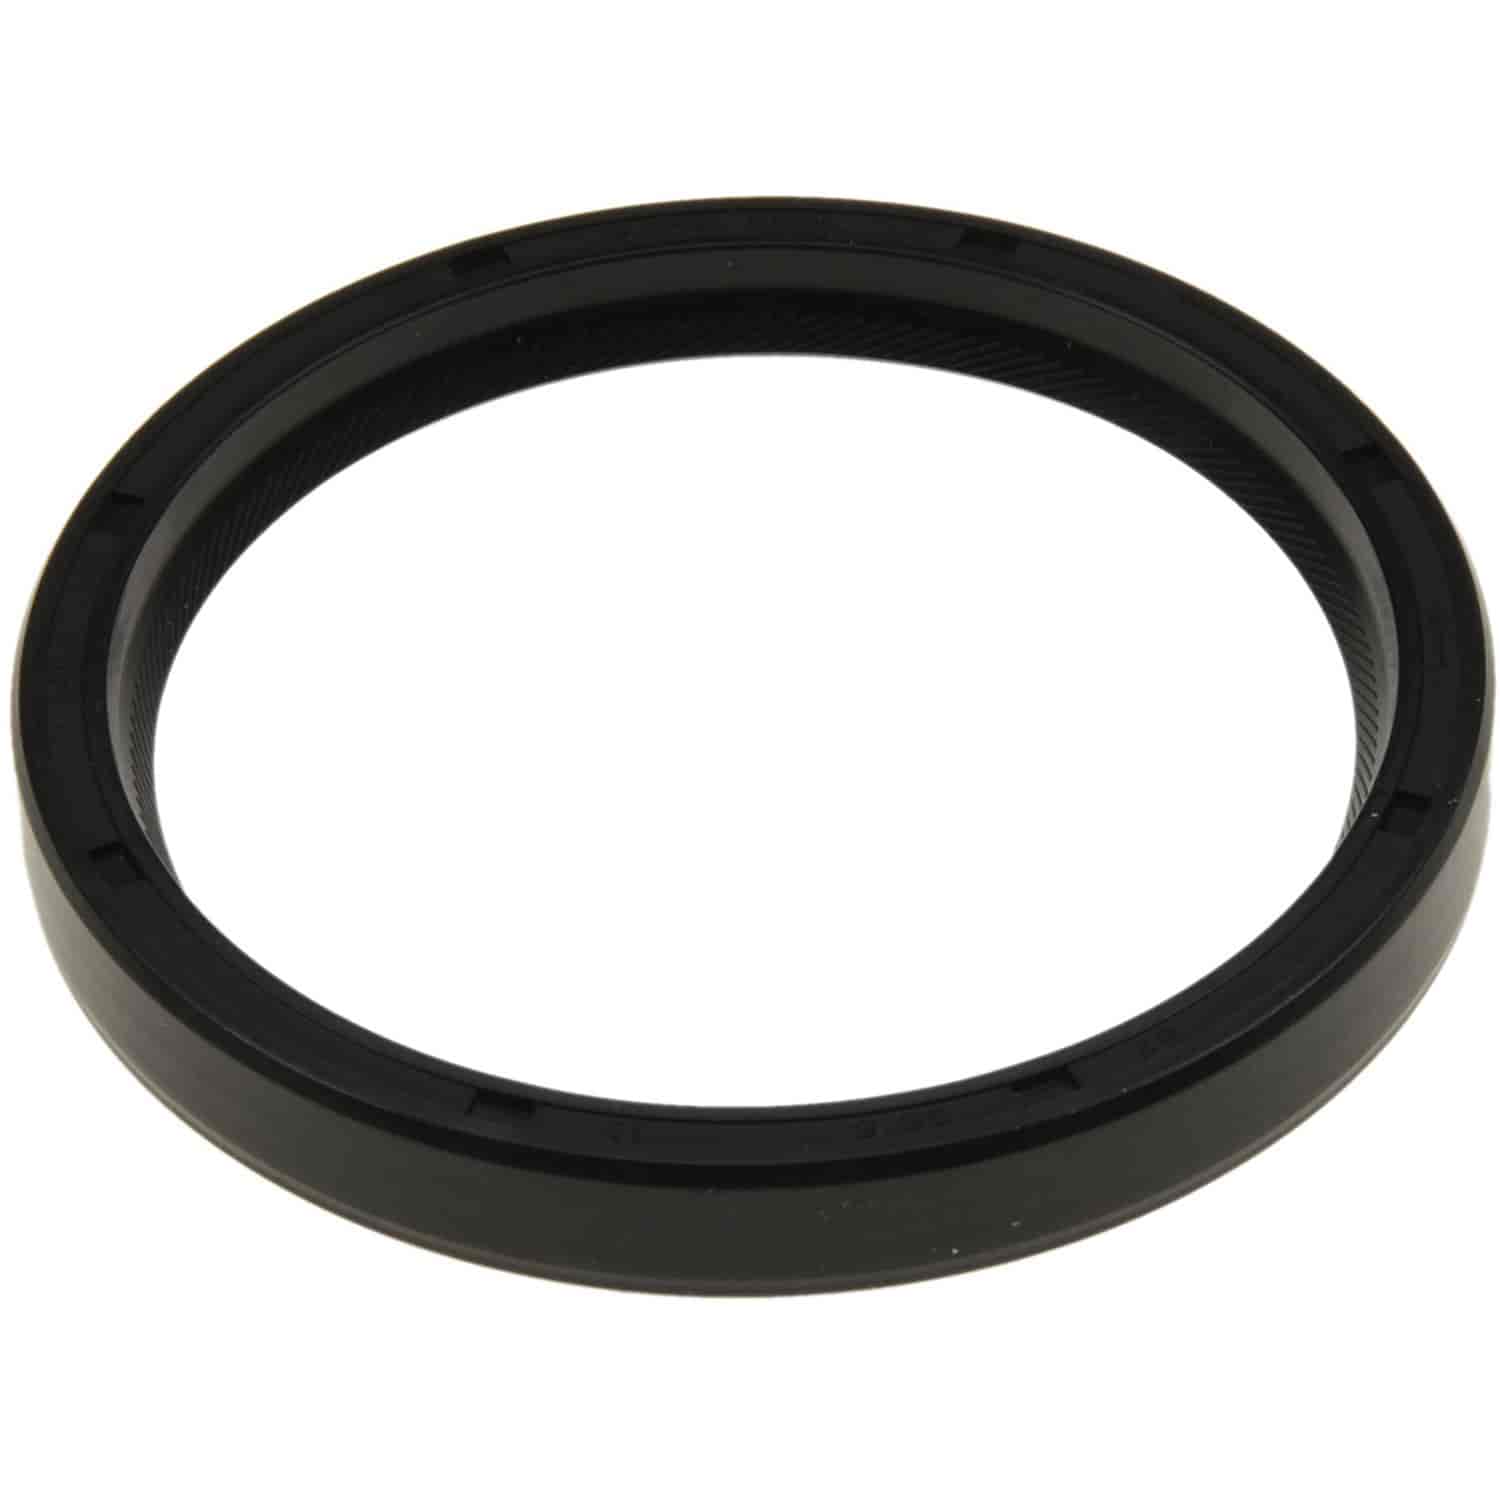 Rear Main Seal Land Rover 3.9L 1990-1995 Range Rover Defender 110 Defender 90 Discovery